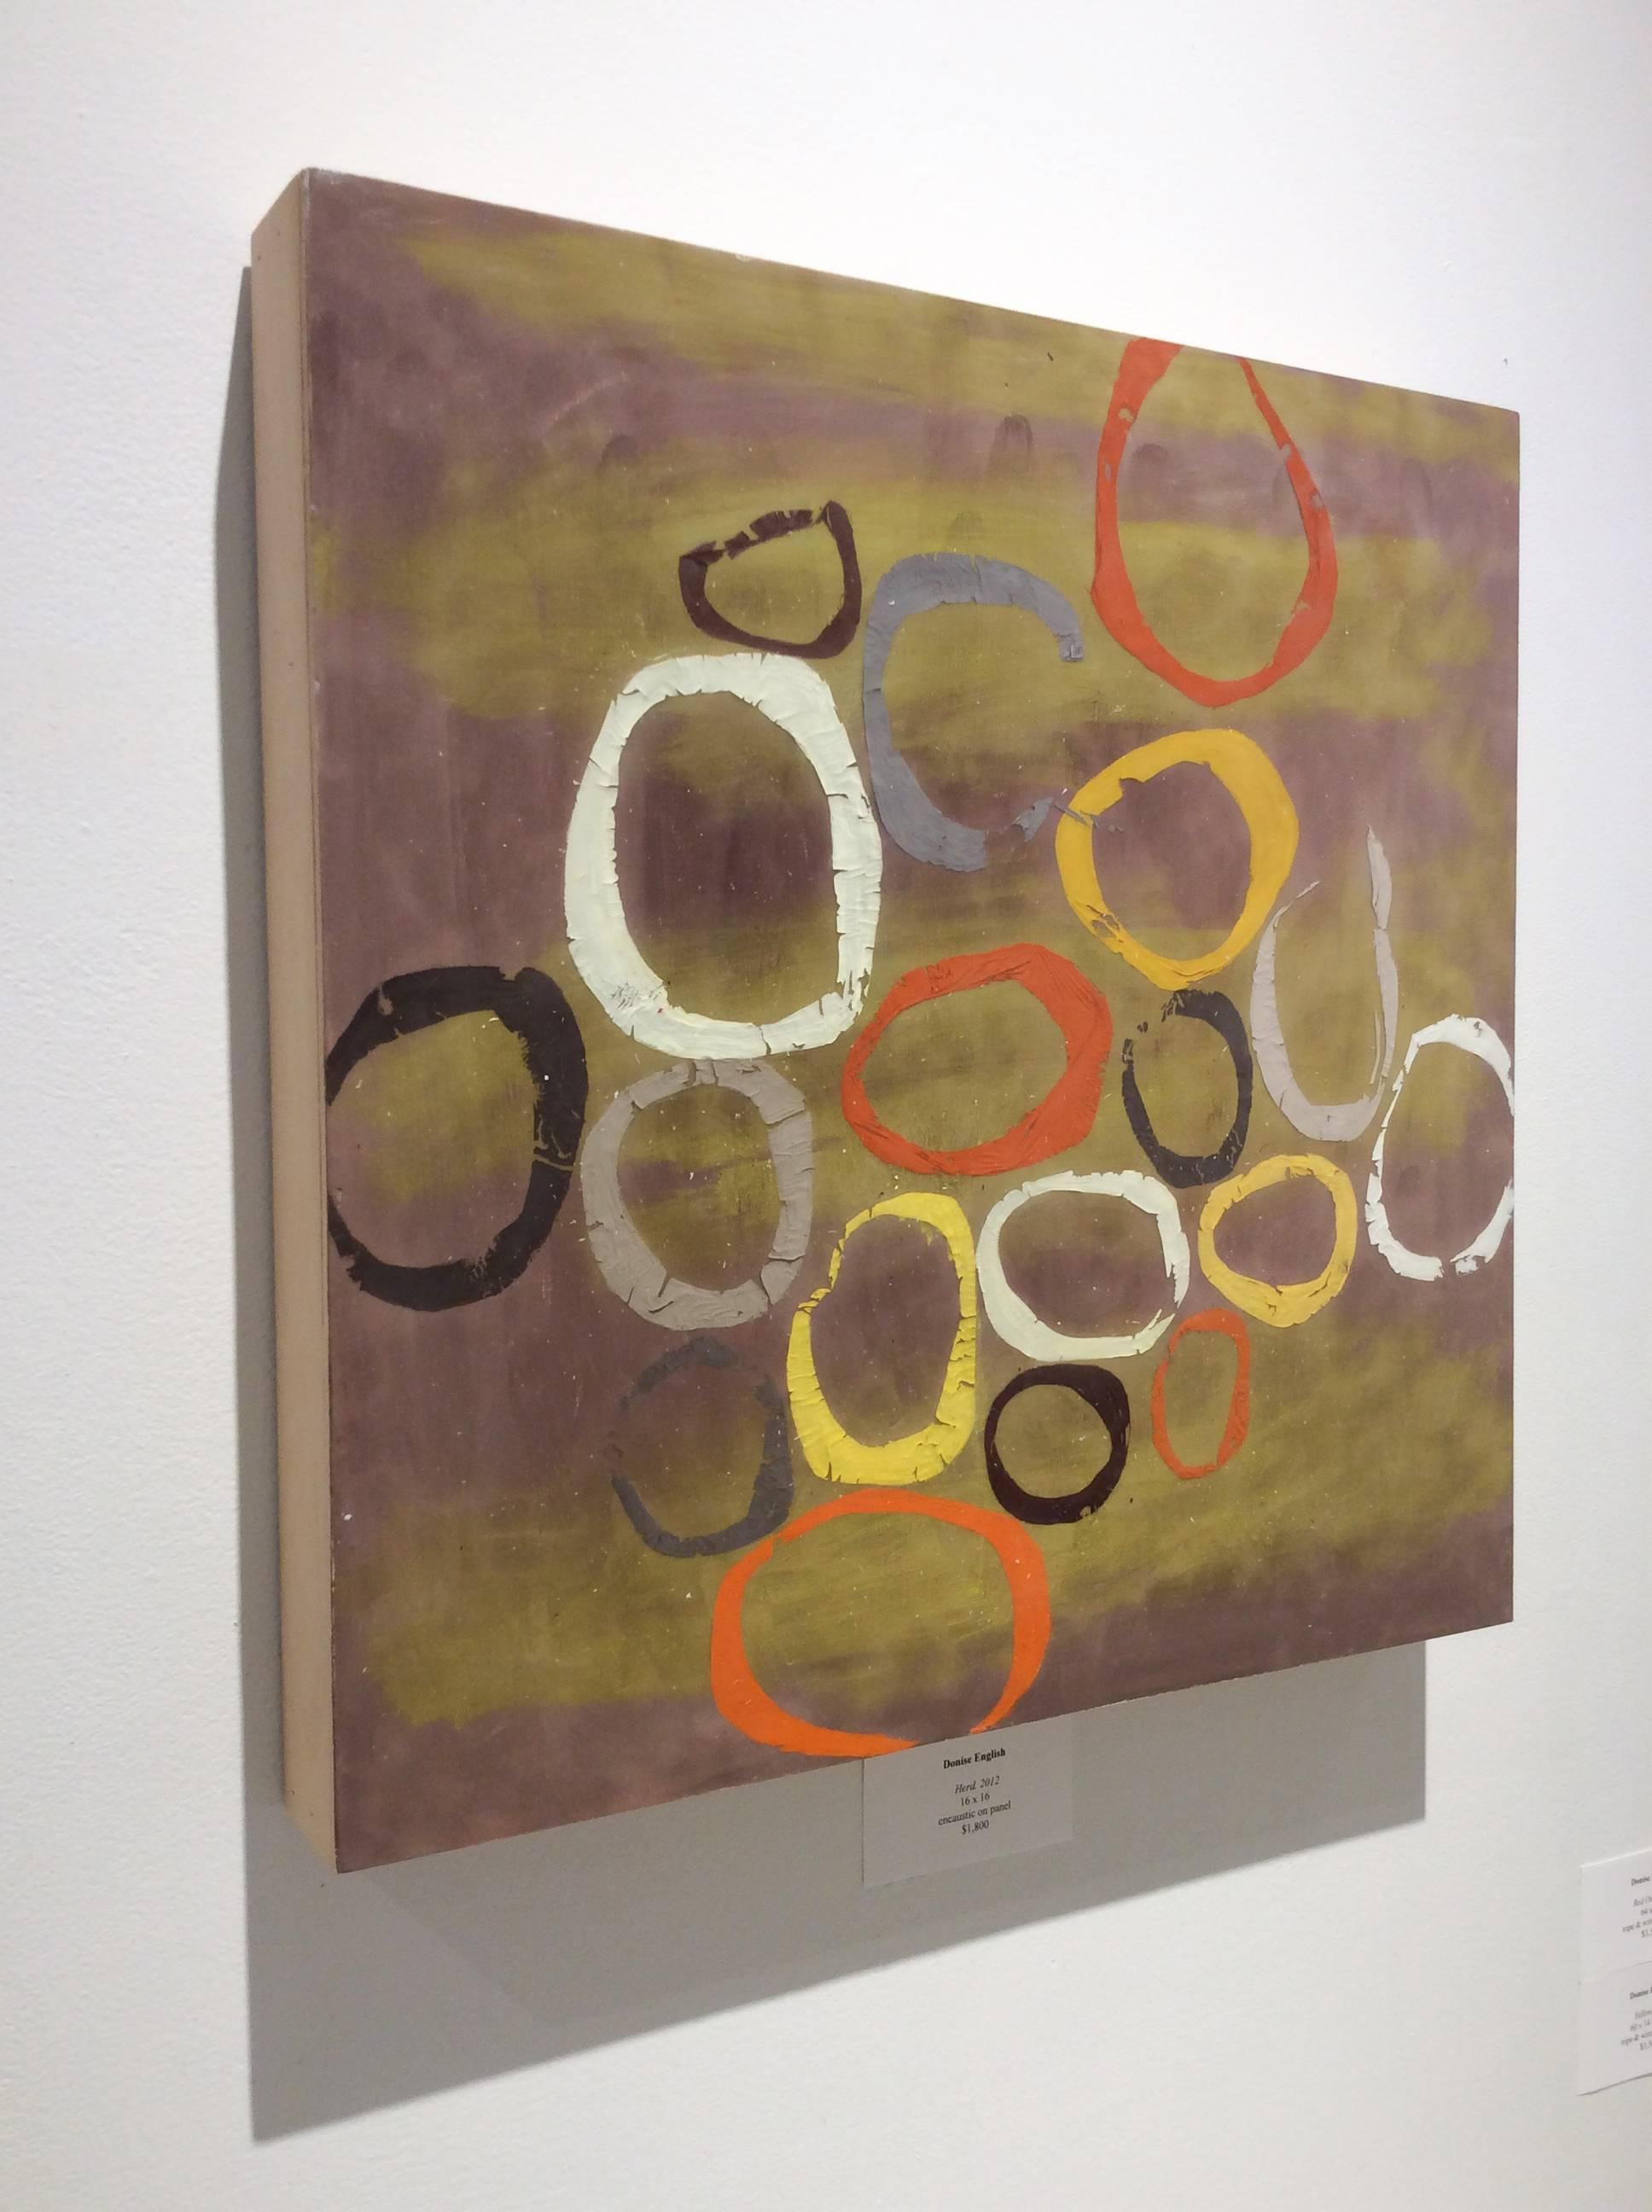 Herd (Abstract Encaustic Painting Panel in Olive Green, Graphic Orange Circles) - Contemporary Mixed Media Art by Donise English